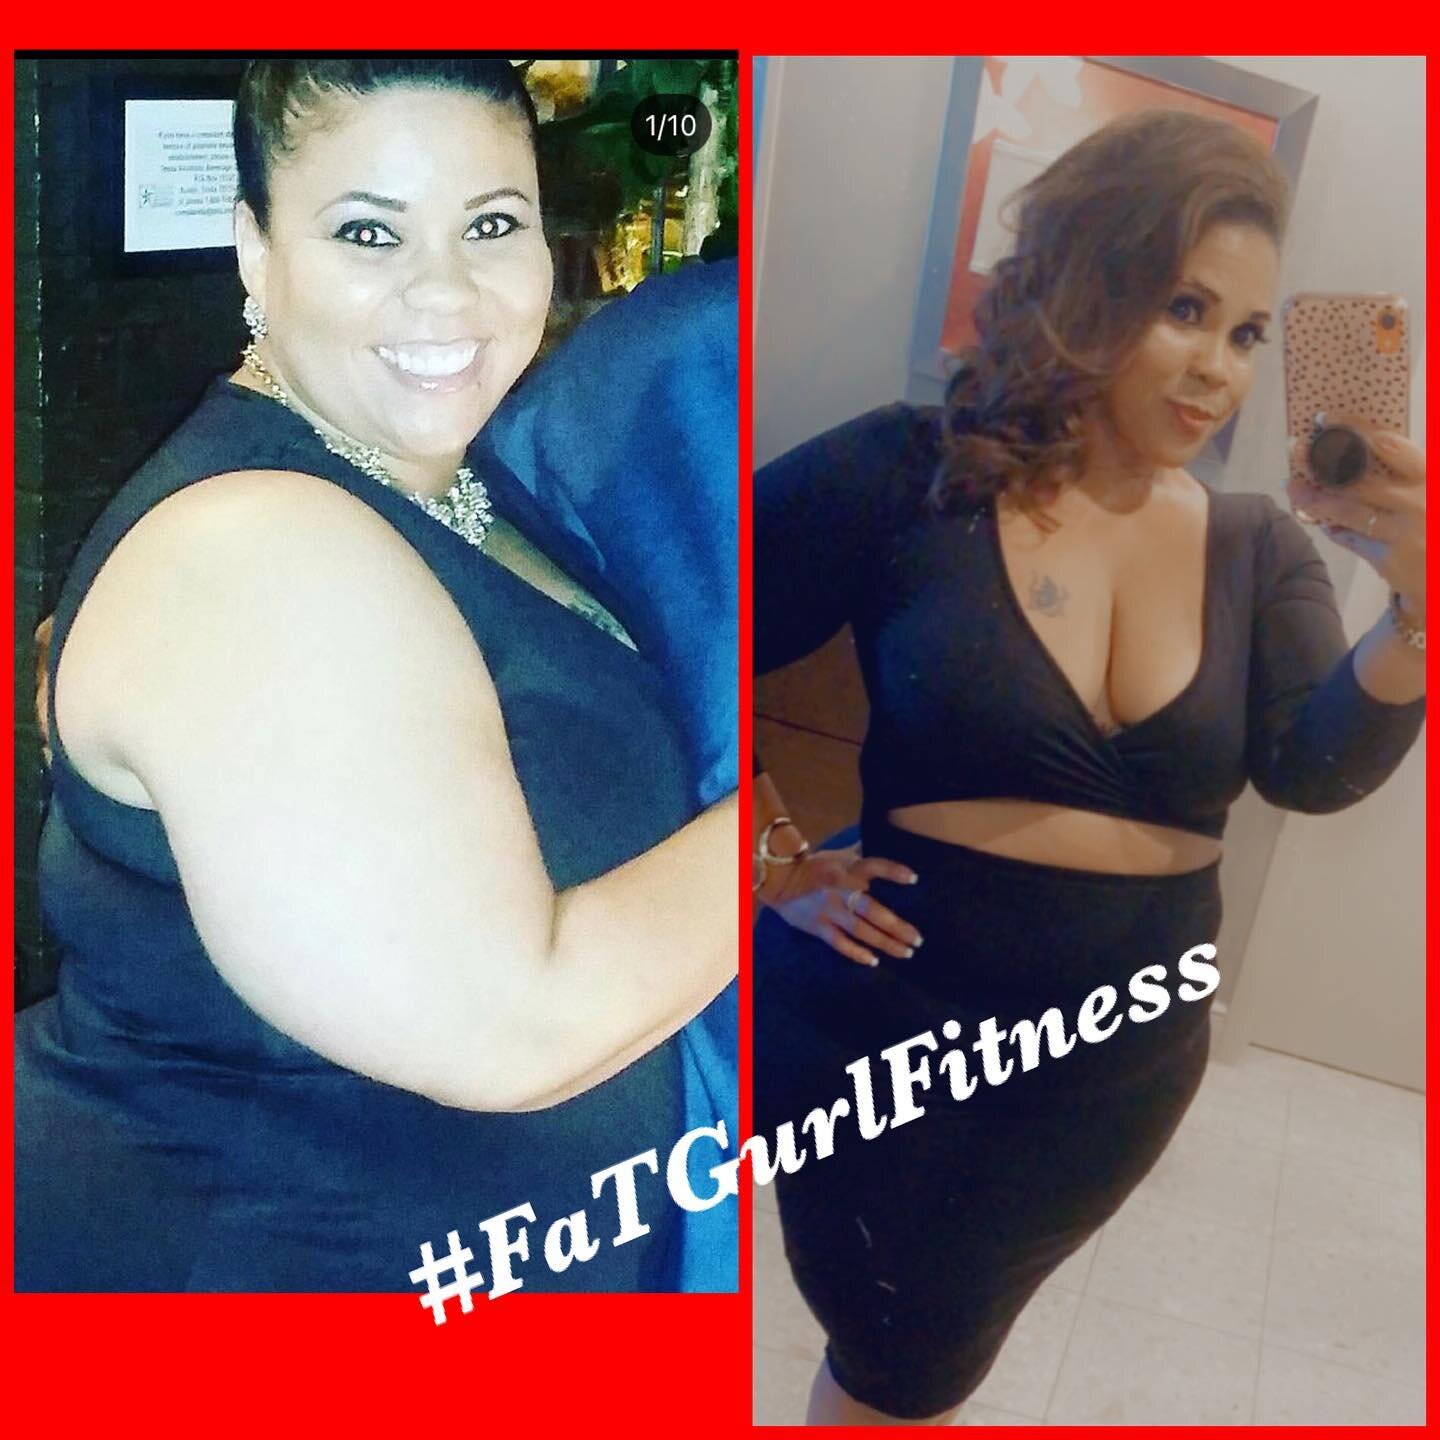 #throwbackthursday #flashbackfriday #fatgurlfitness One pic when you look like what you&rsquo;ve been through. Another pic when you don&rsquo;t look like what you&rsquo;ve been through. #transformation